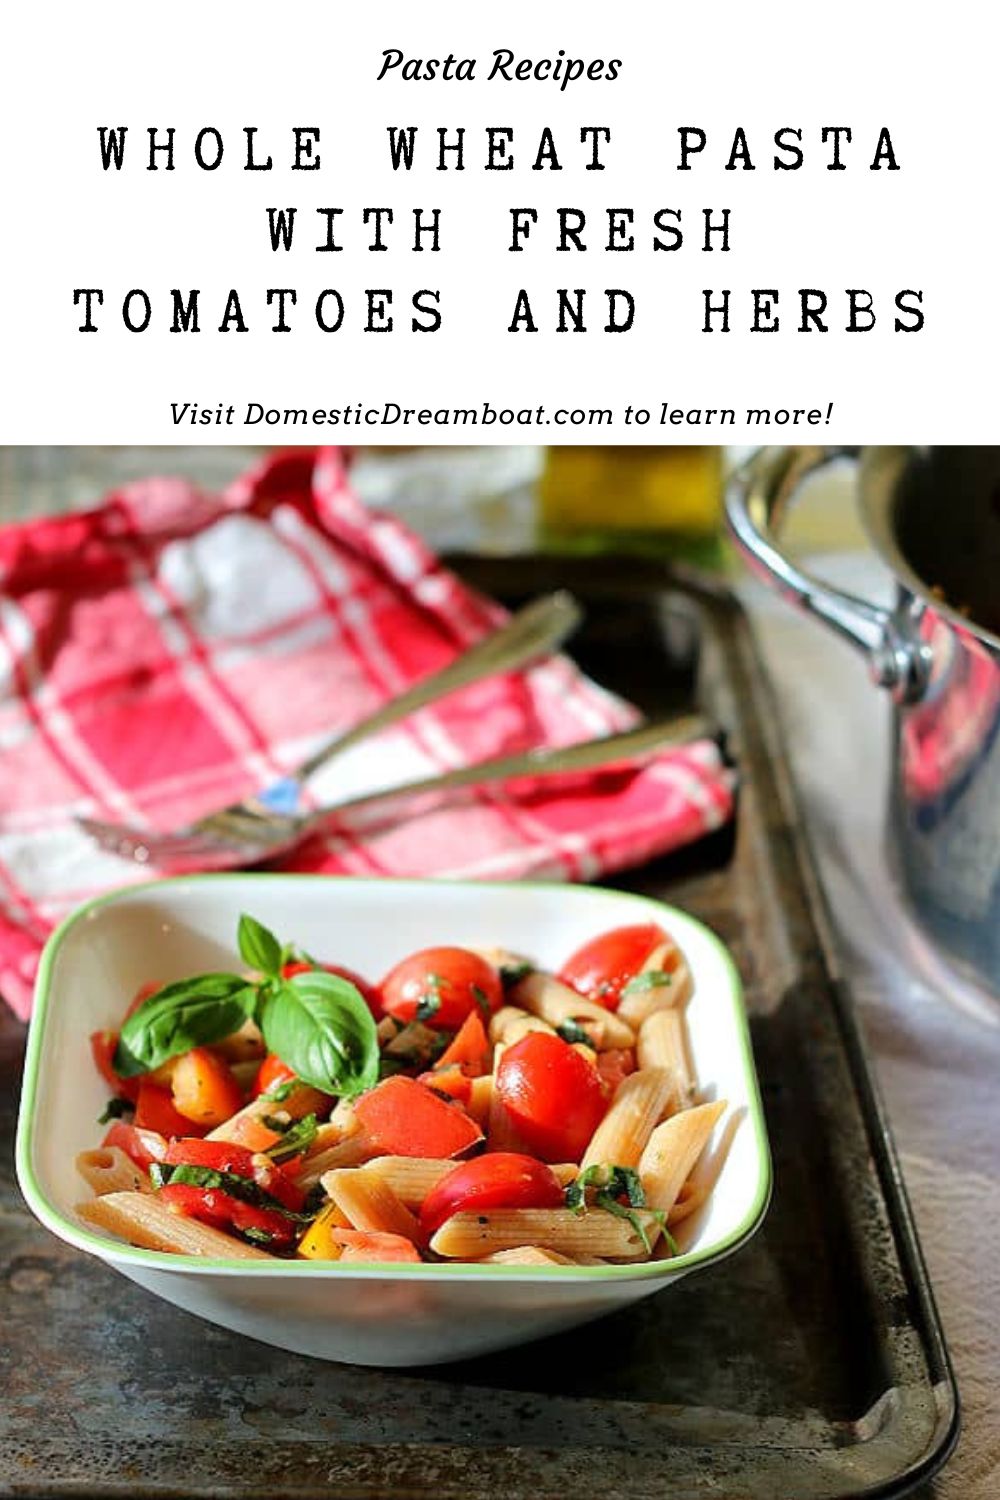 Whole Wheat Pasta with Fresh Tomatoes and Herbs